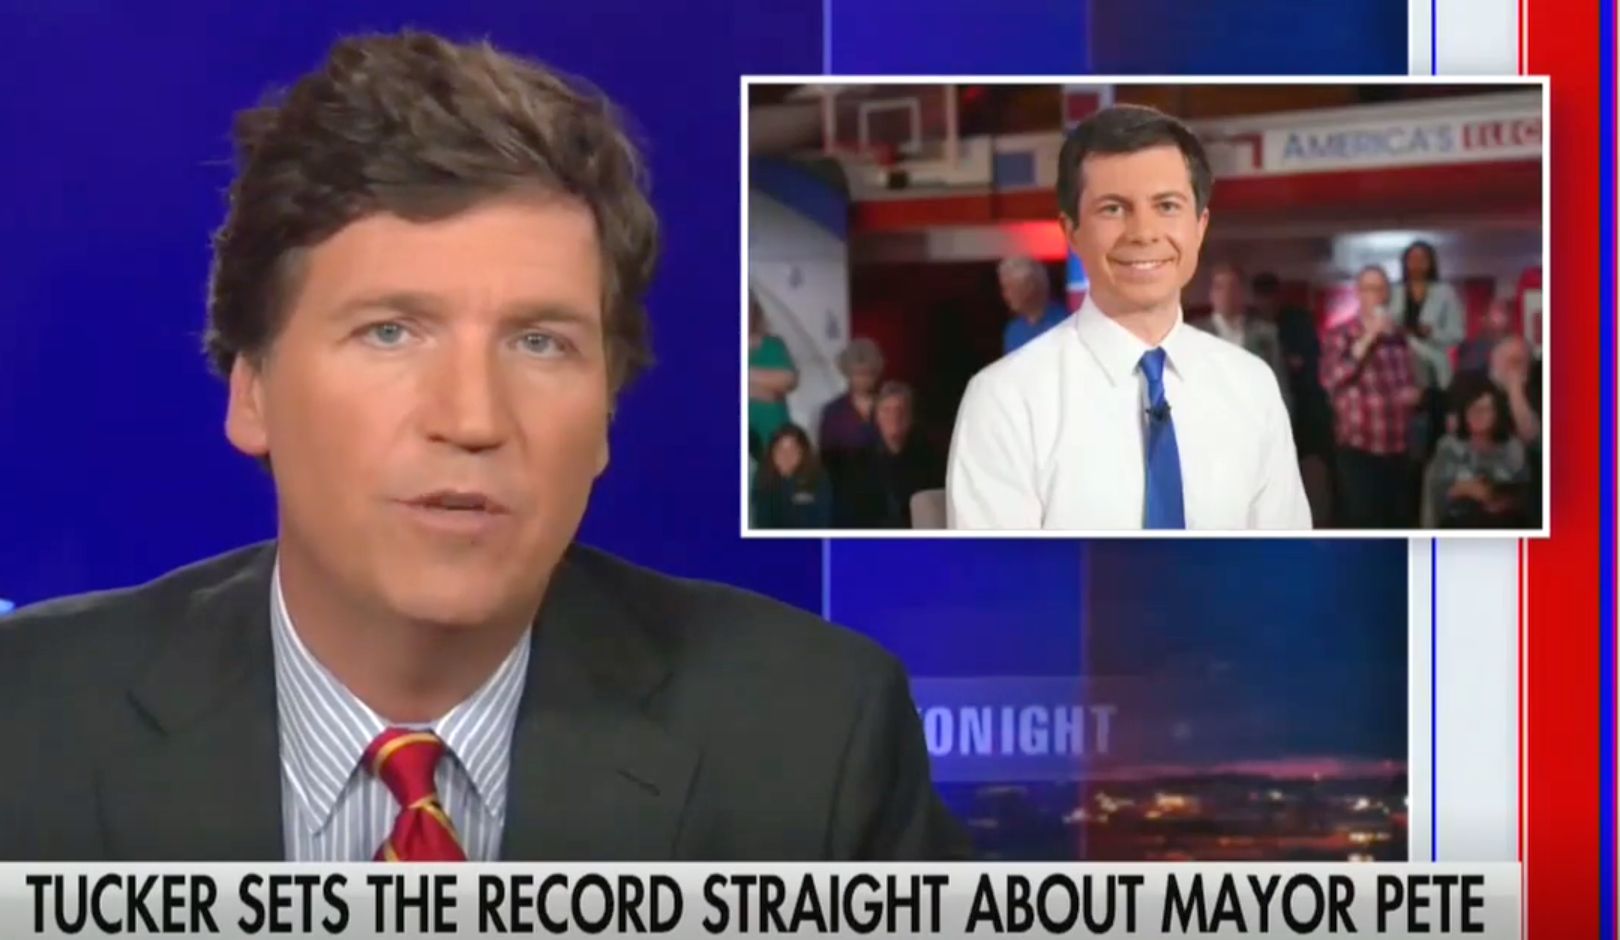 Tucker Carlson Offers Most Insincere Response To Pete Buttigieg Attack Backlash